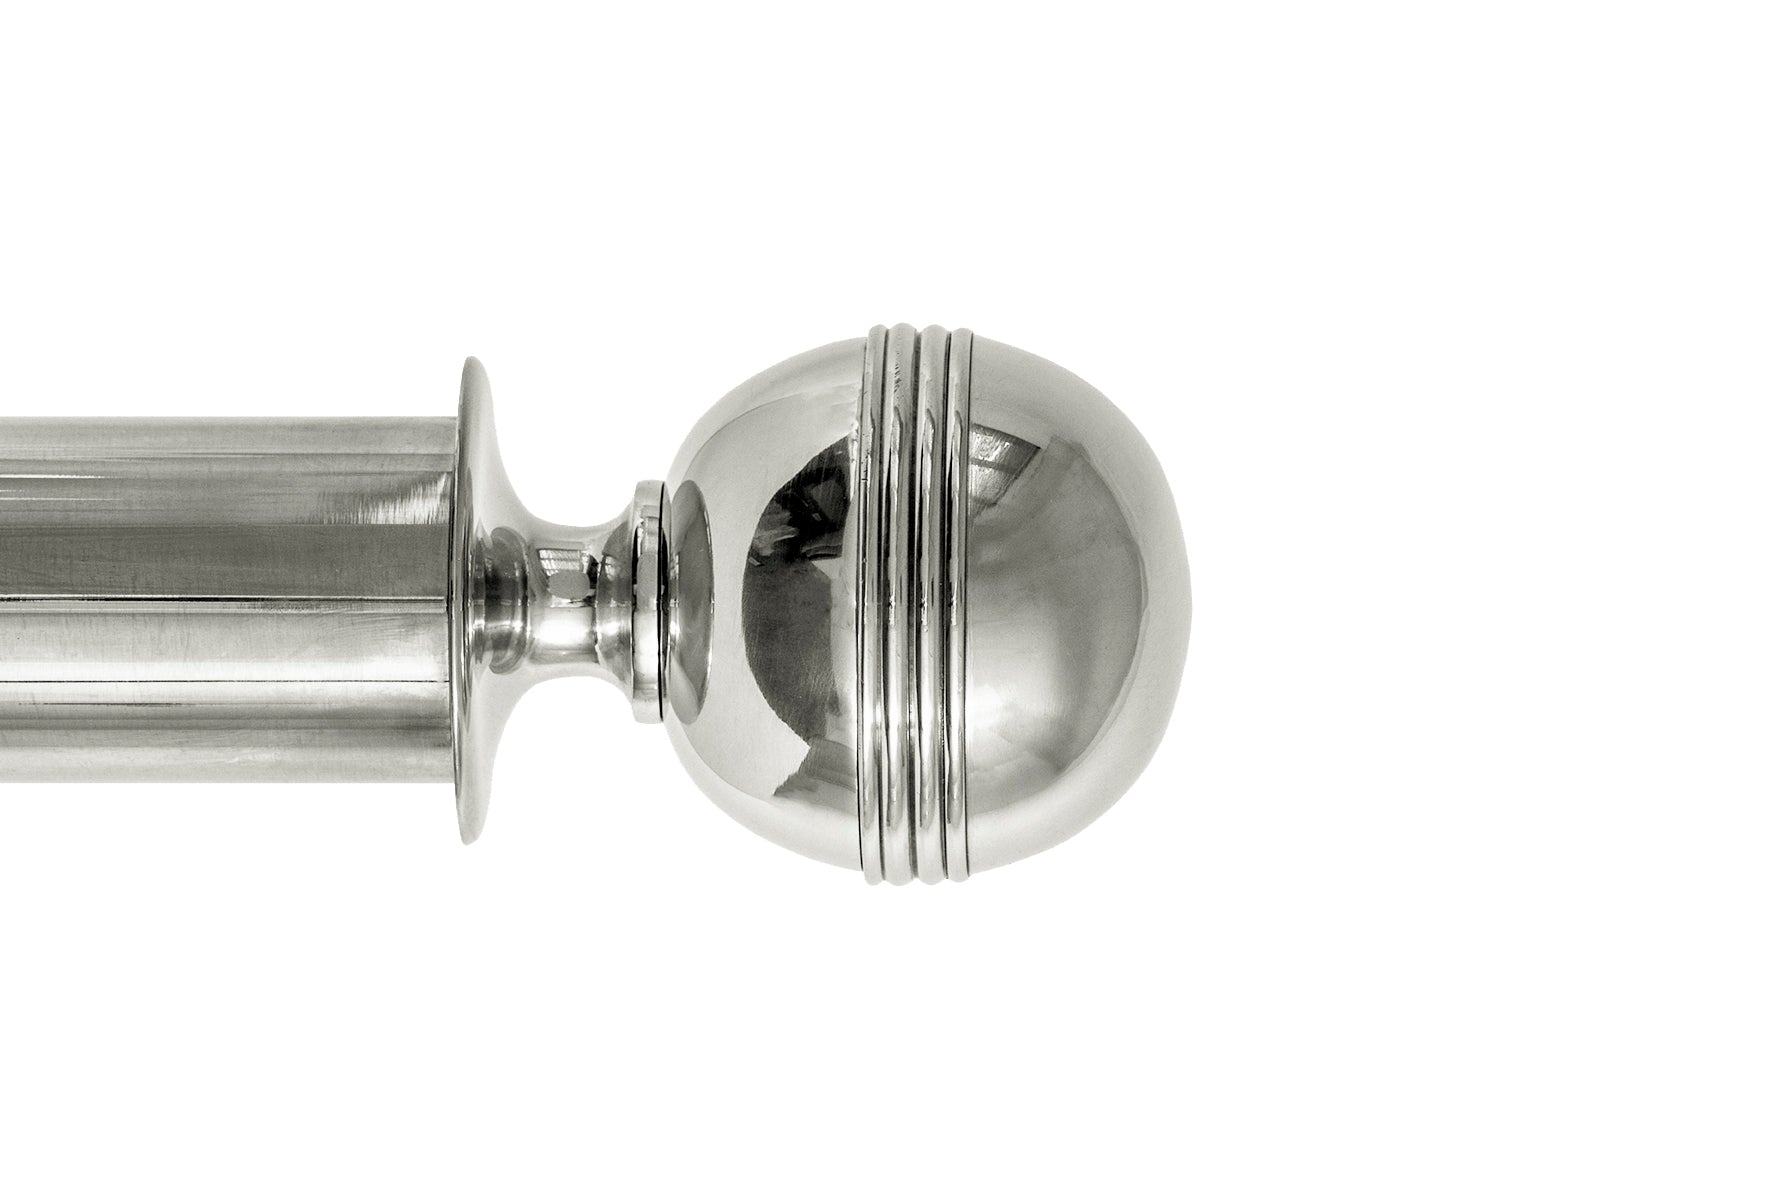 Tillys Classic Four Rib Ball Finial Curtain Pole Set in Polished Nickel